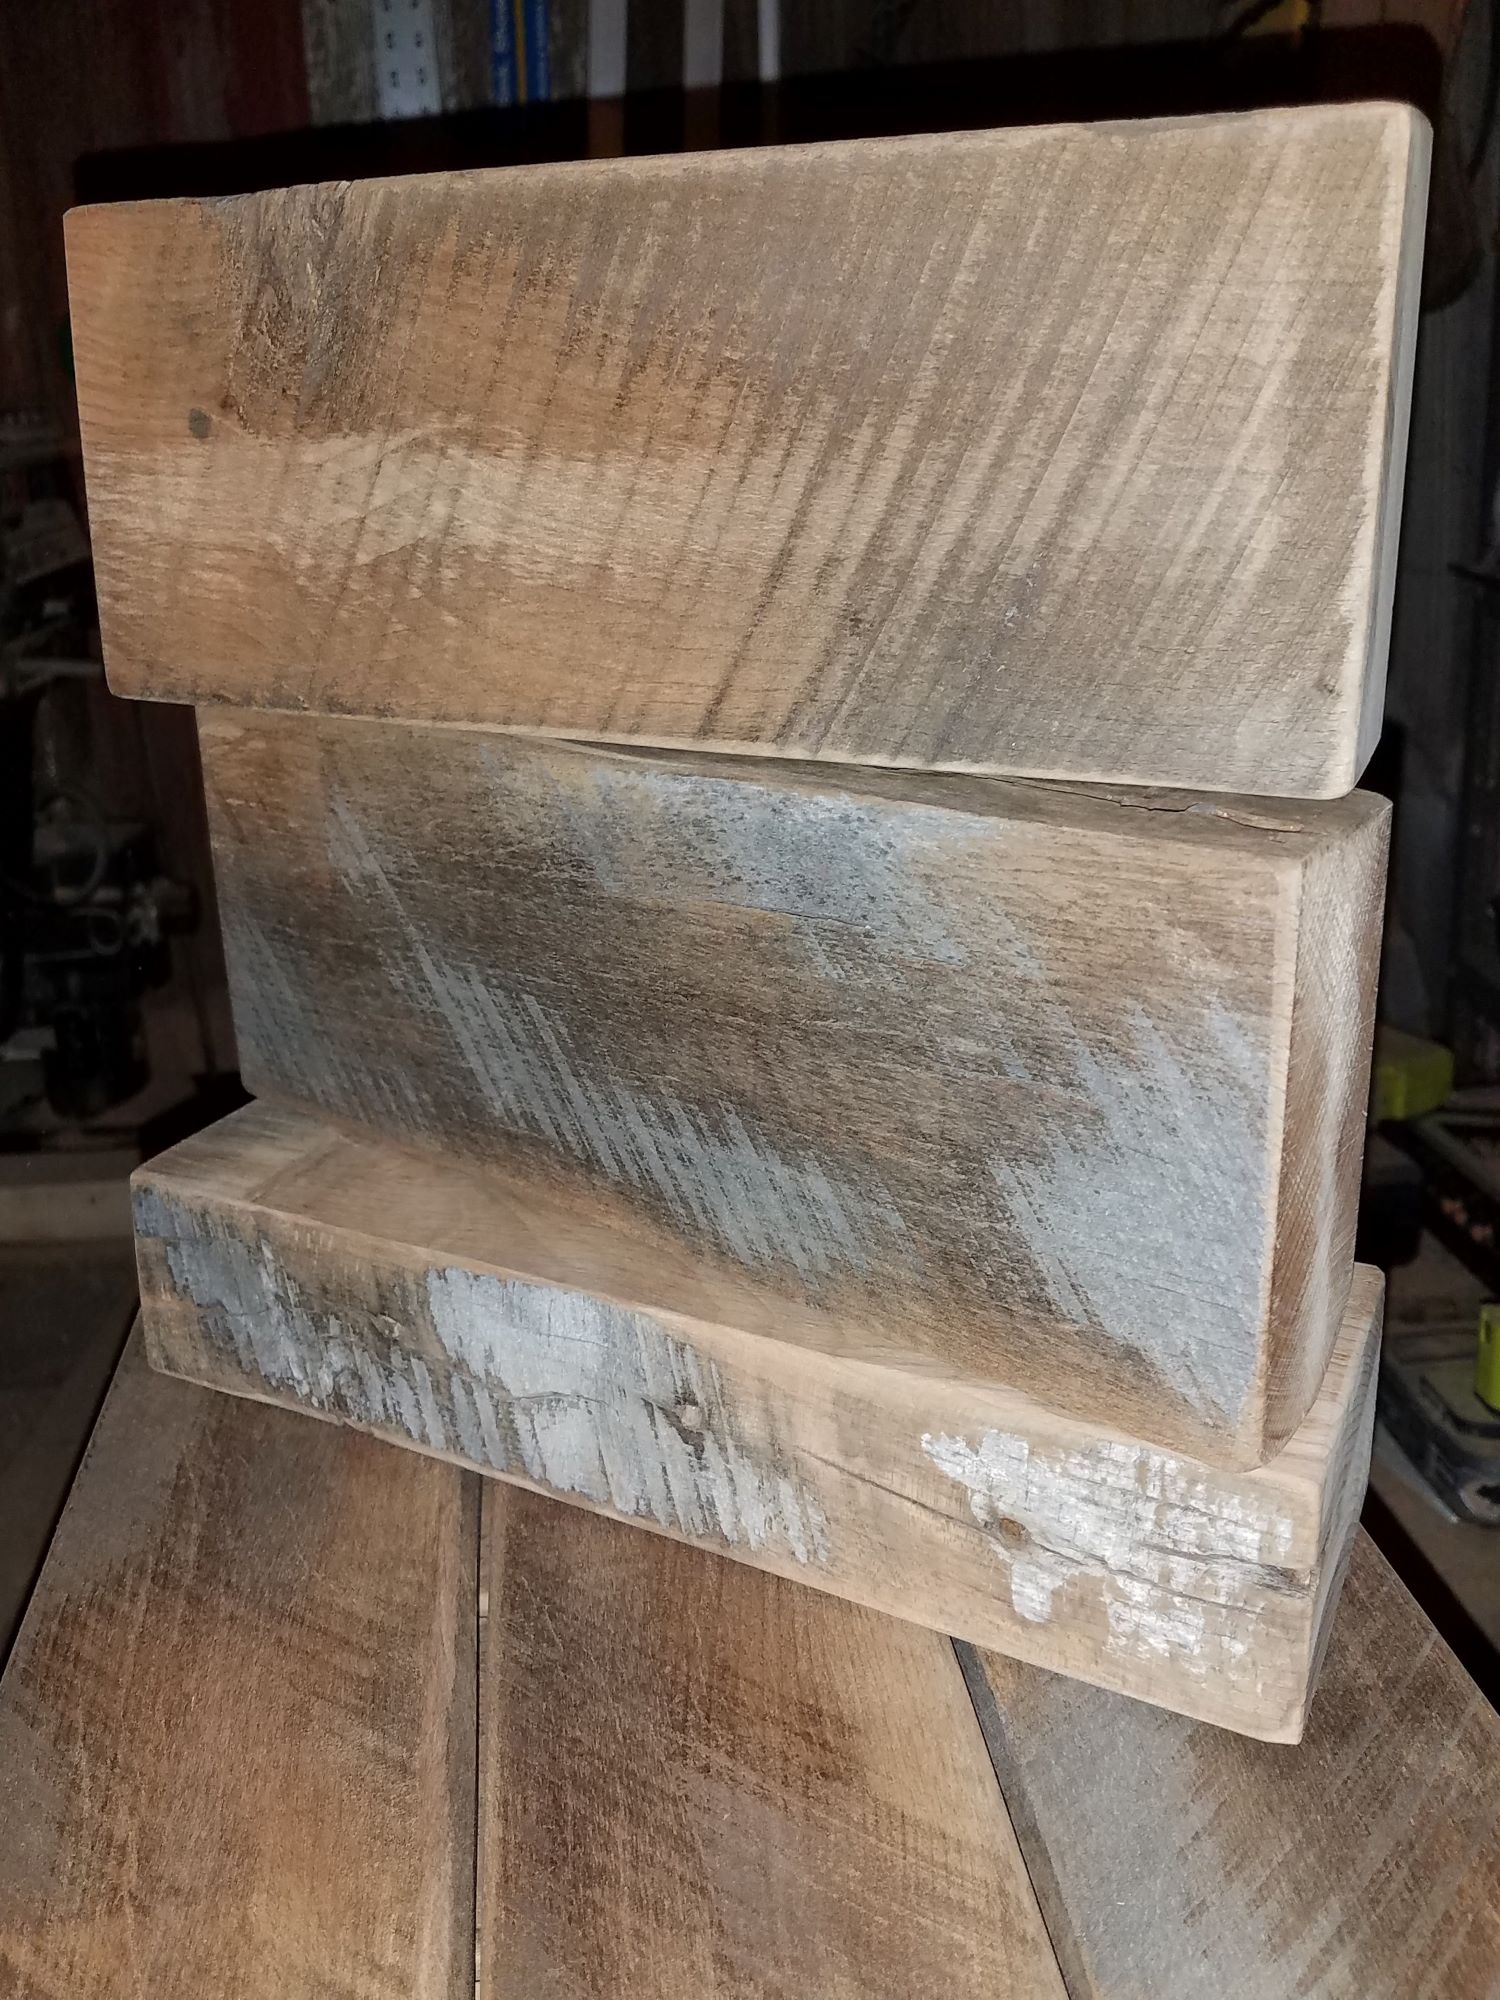 A few pieces of reclaimed barnwood that will be made into a giant jenga set